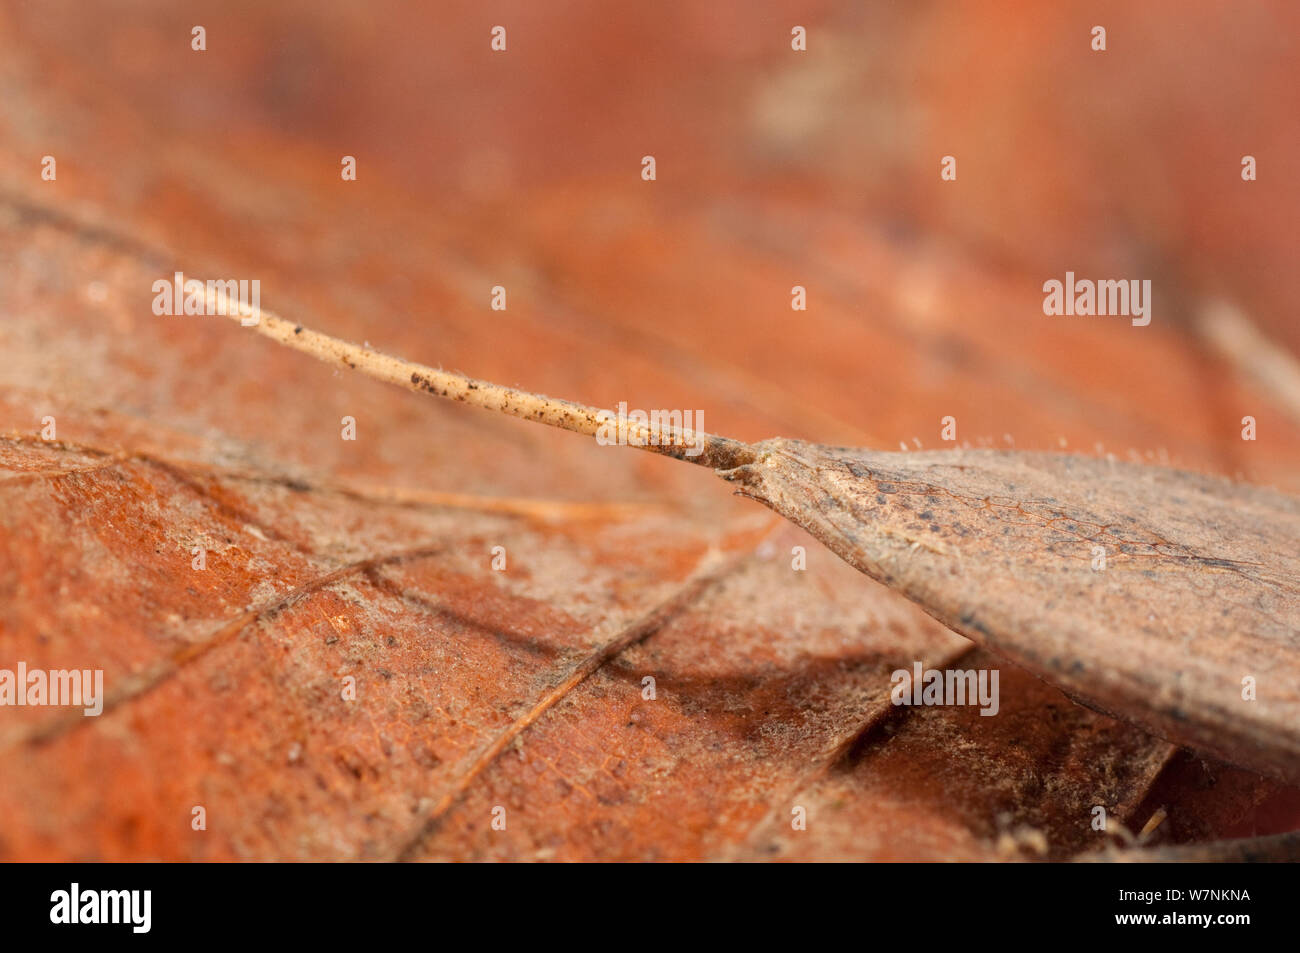 Water scorpion (Nepa cinerea) breathing tube siphon detail, Europe, May, controlled conditions Stock Photo